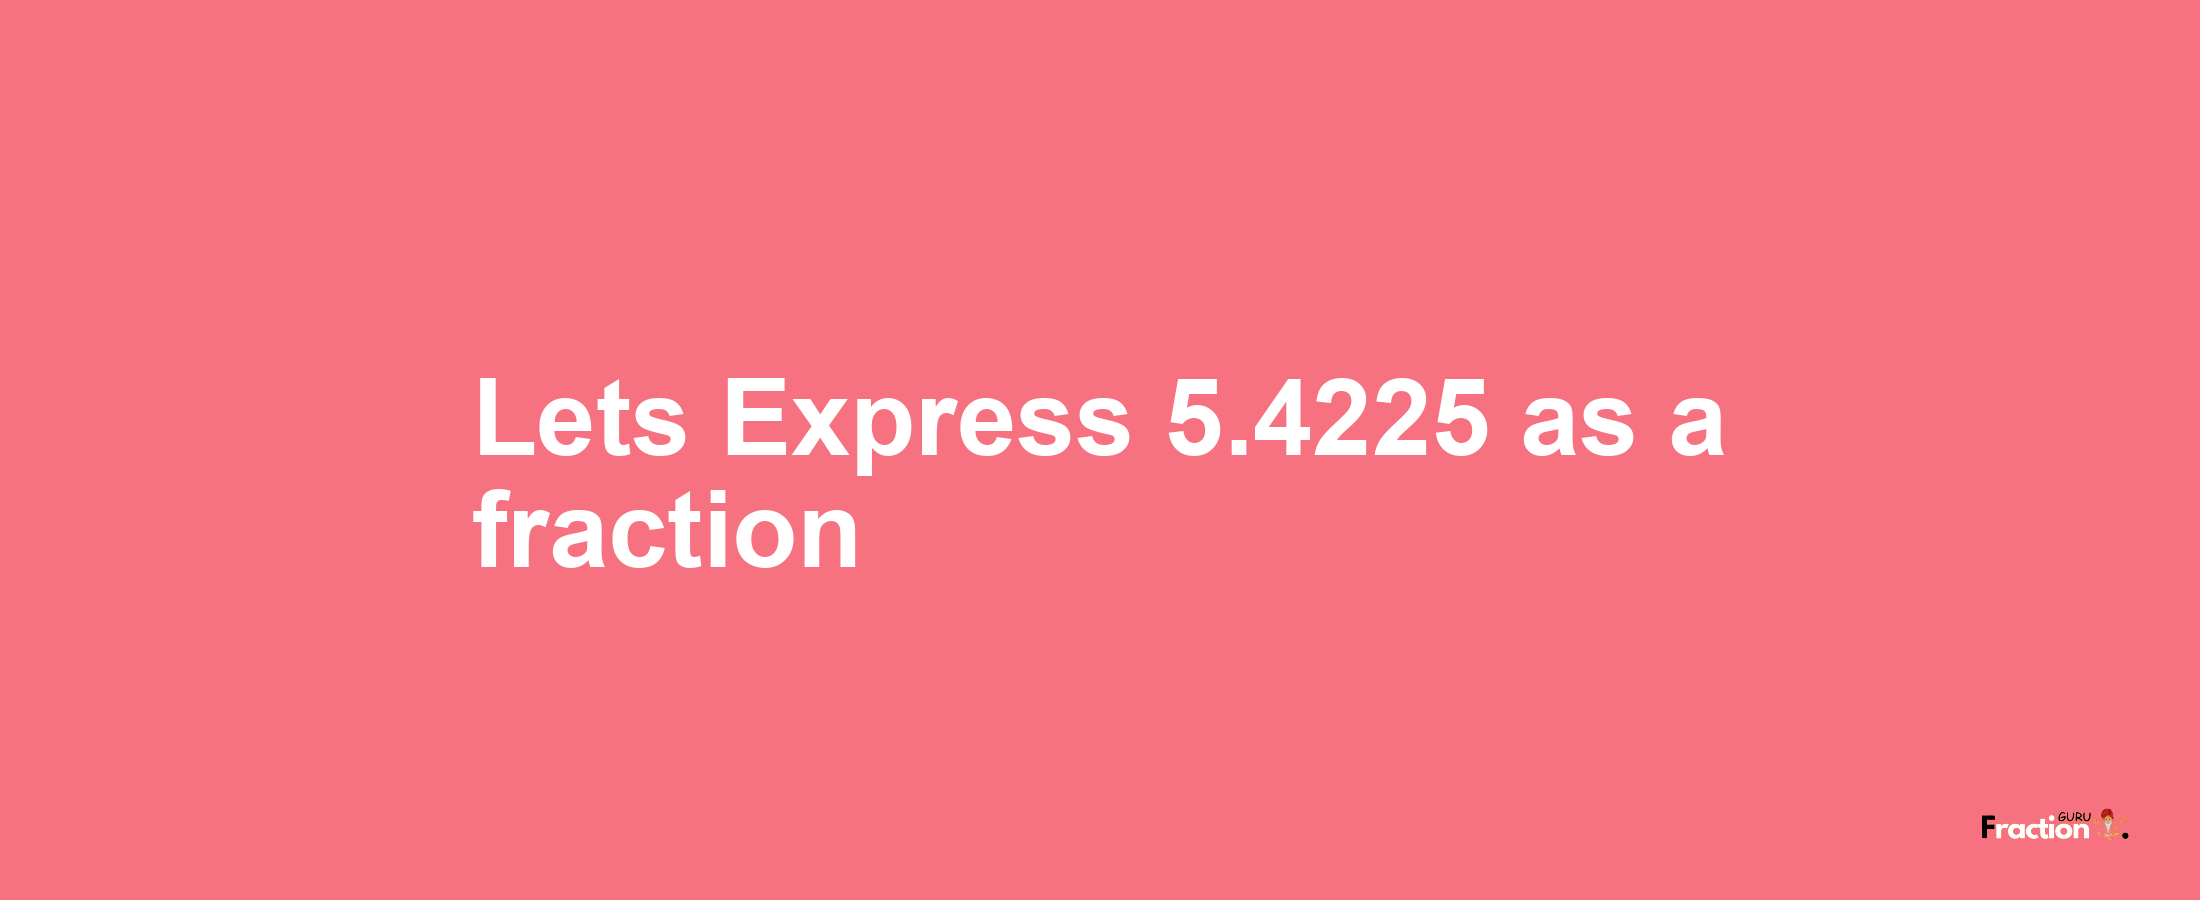 Lets Express 5.4225 as afraction